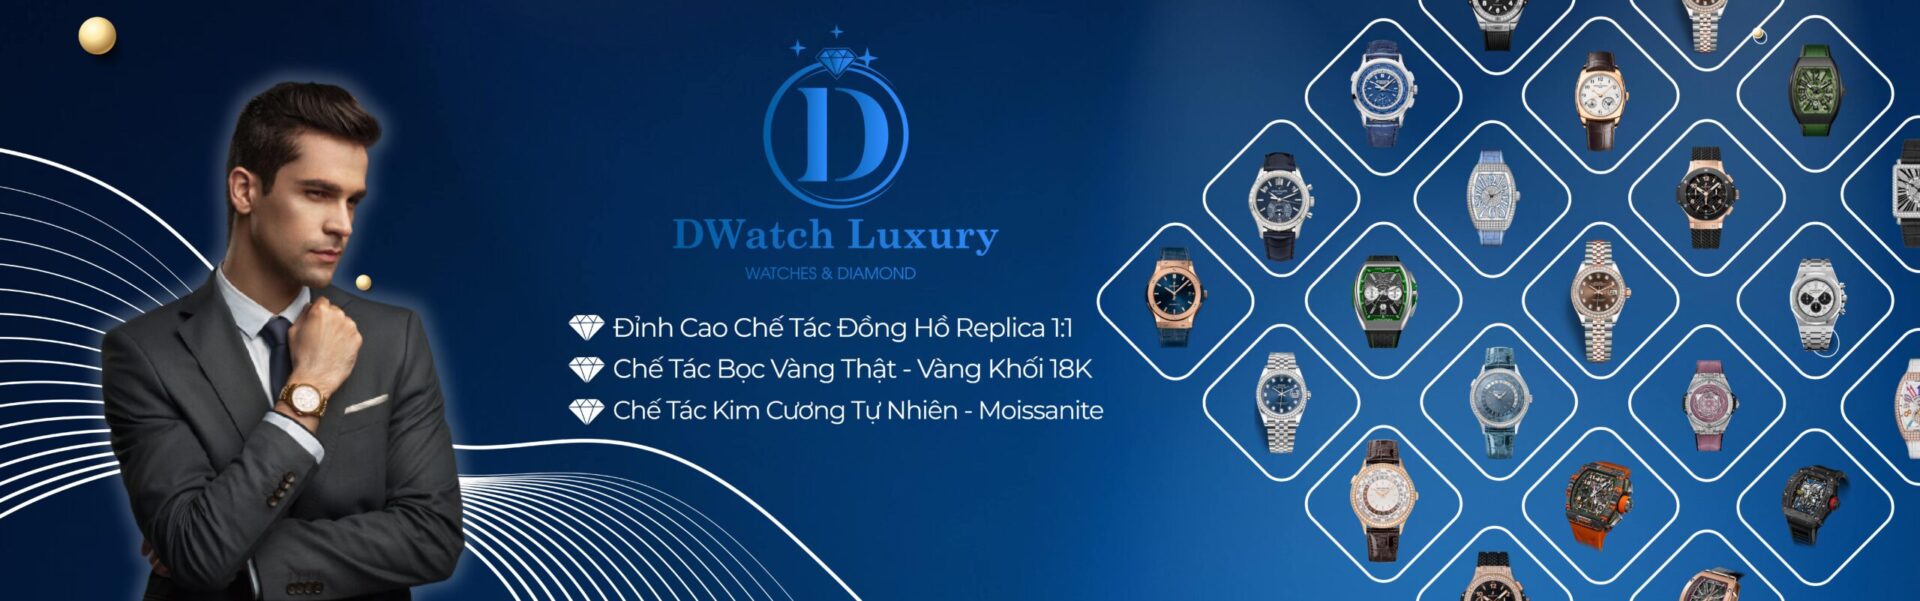 Banner DWatch Luxury Đồng Hồ Replica Cao Cấp